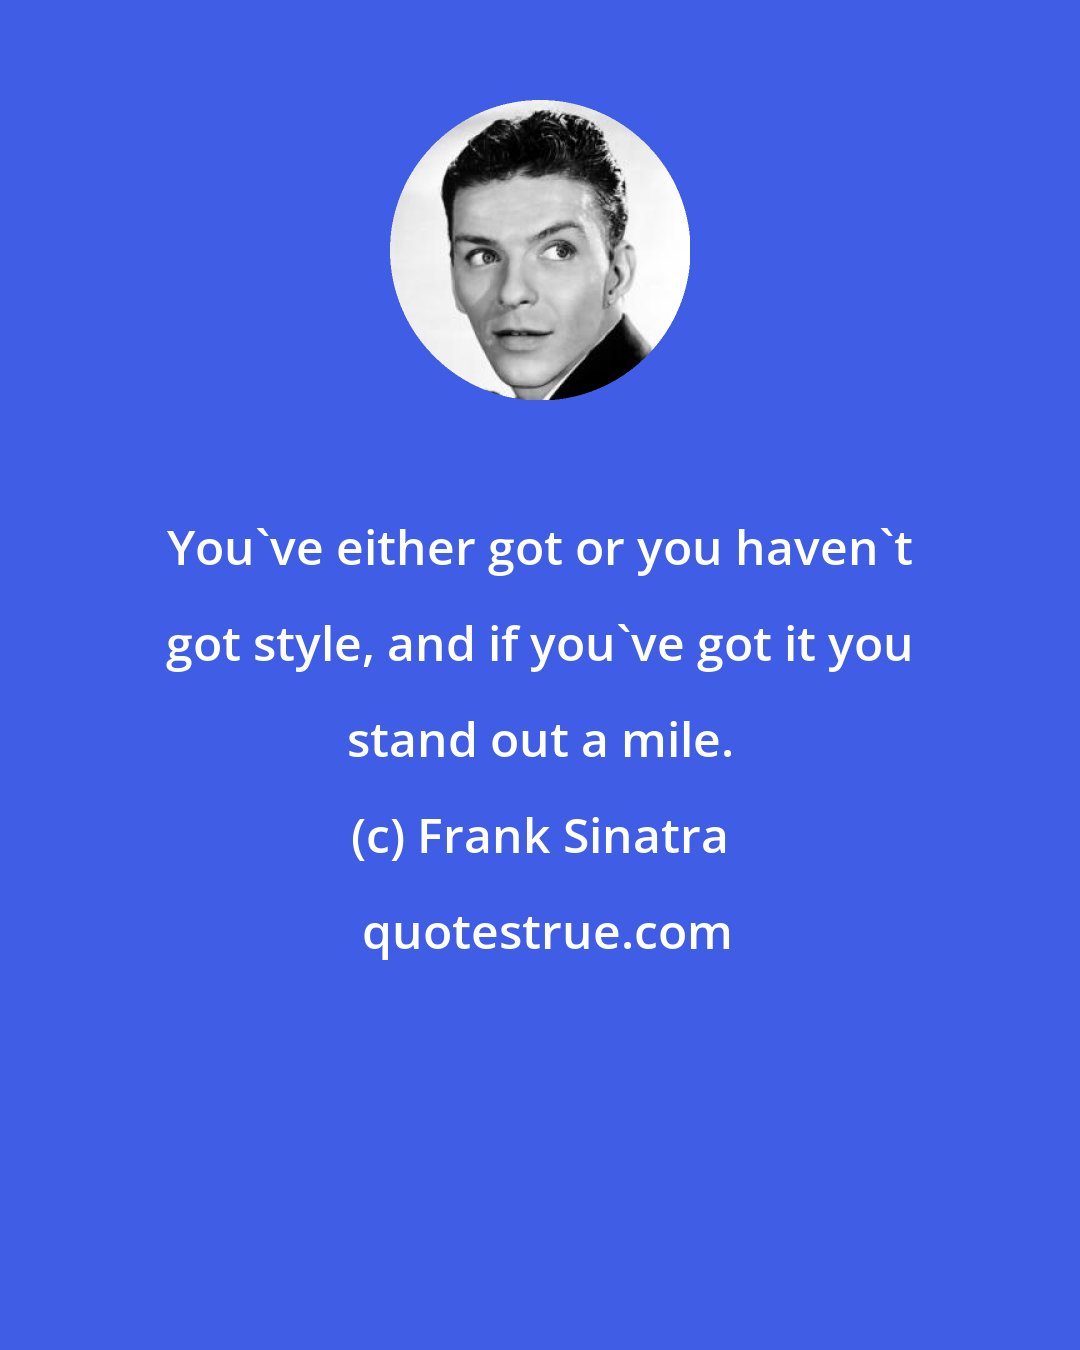 Frank Sinatra: You've either got or you haven't got style, and if you've got it you stand out a mile.